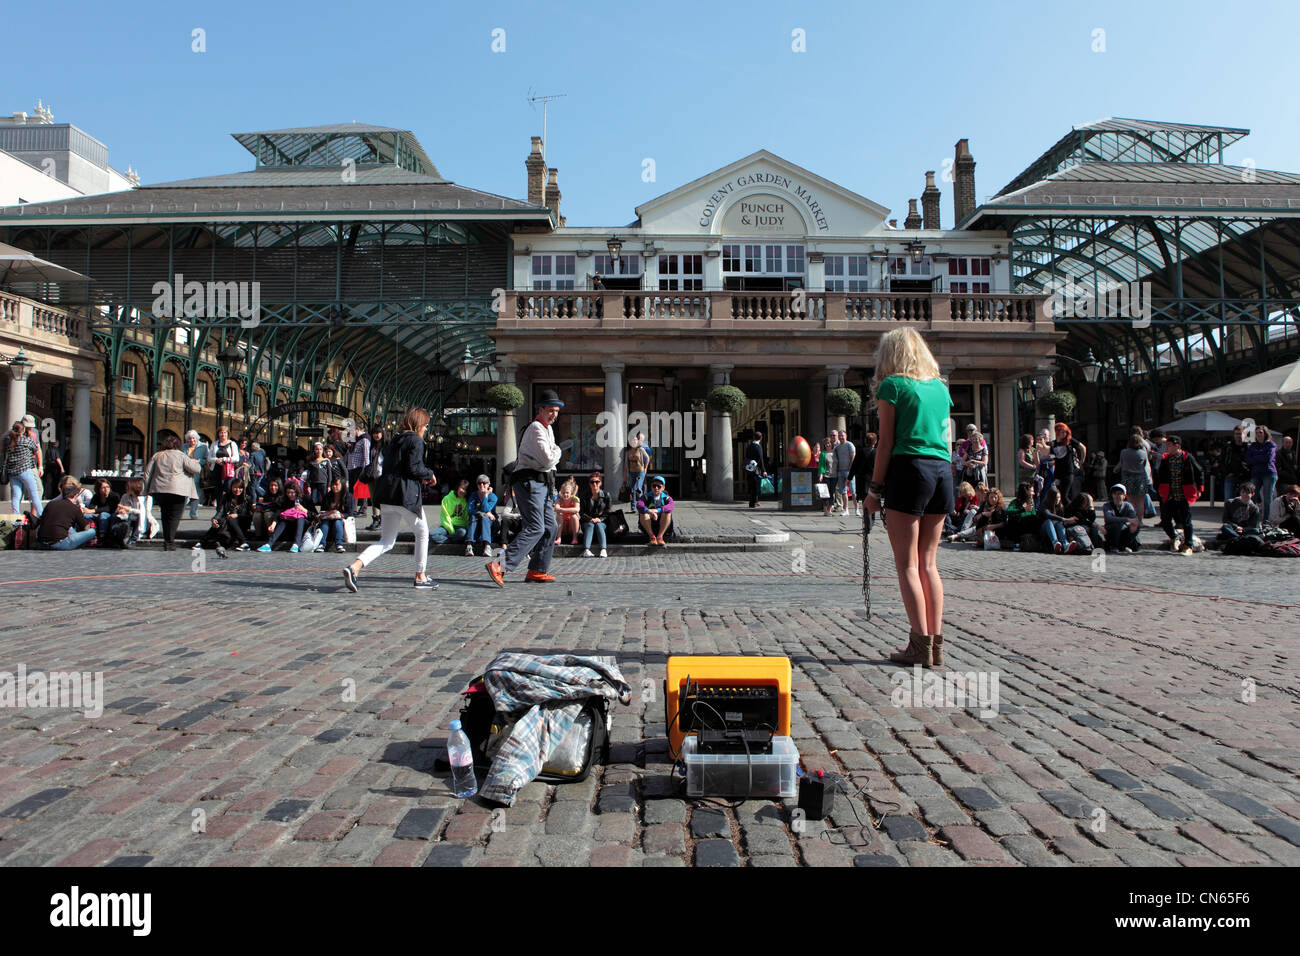 Entertainer performs with two female tourists in Londons Covent Garden Square Stock Photo